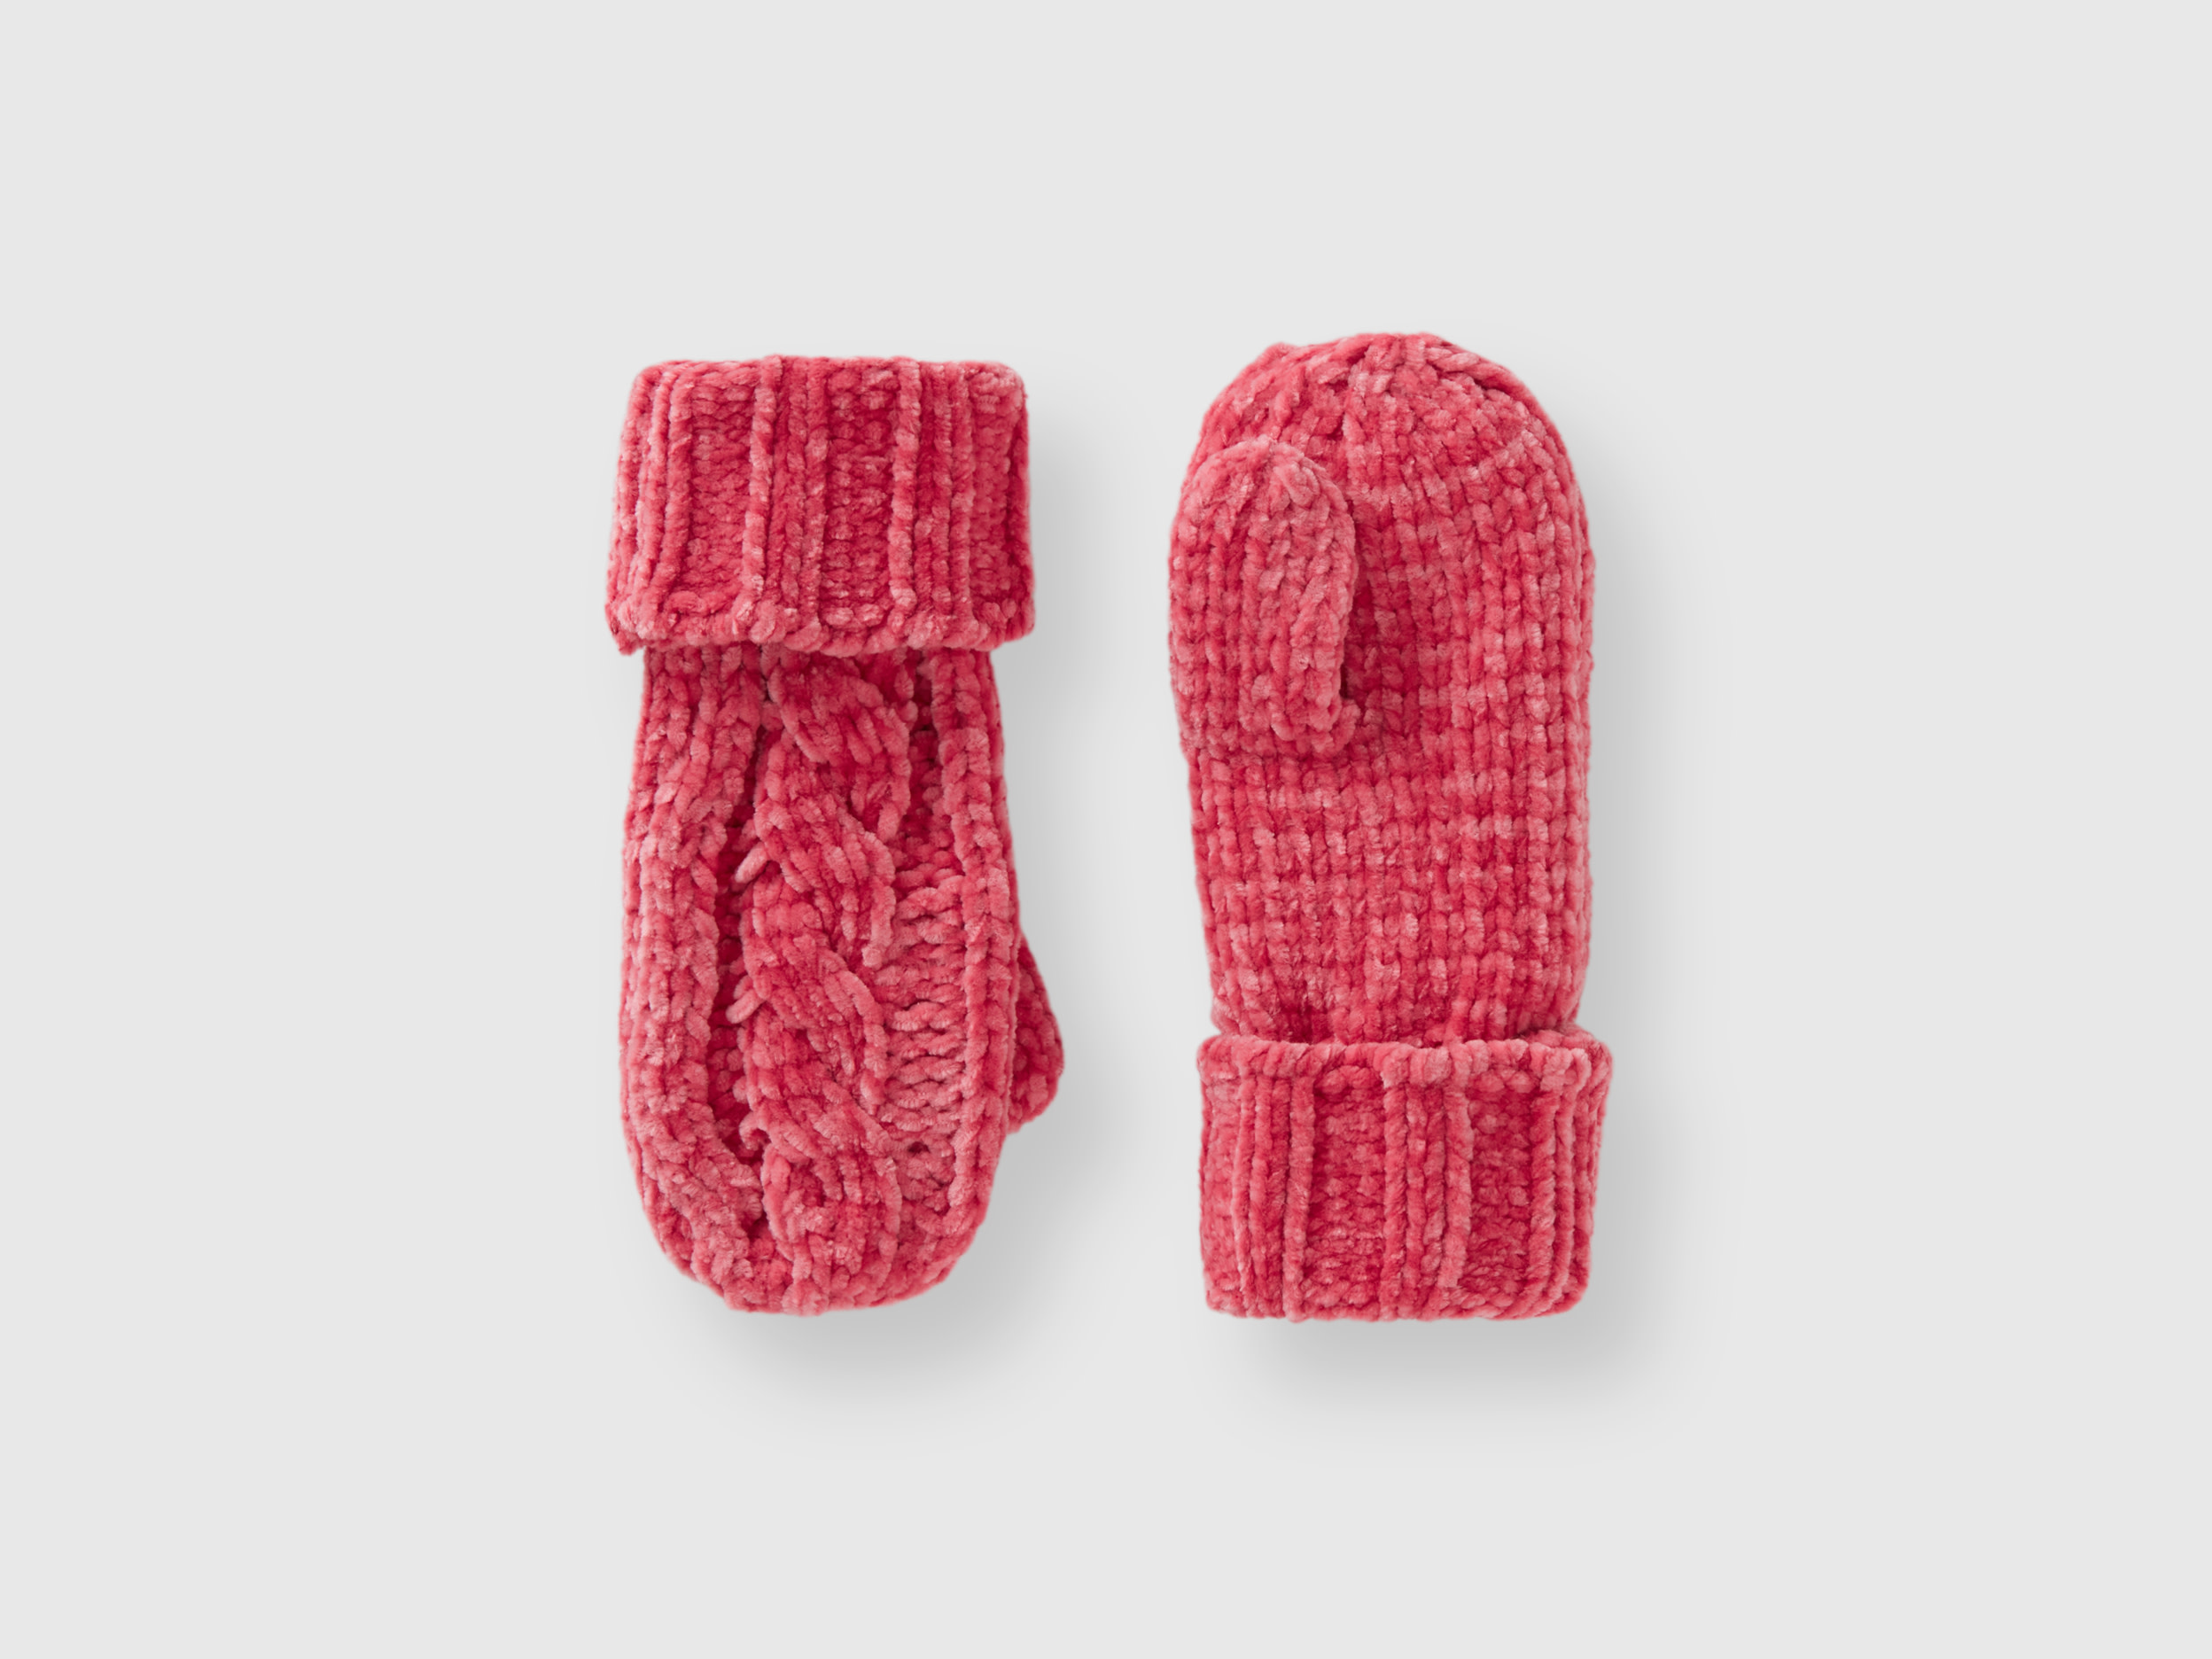 Benetton, Chenille Gloves With Cable Knit, size 1-3, Pink, Kids